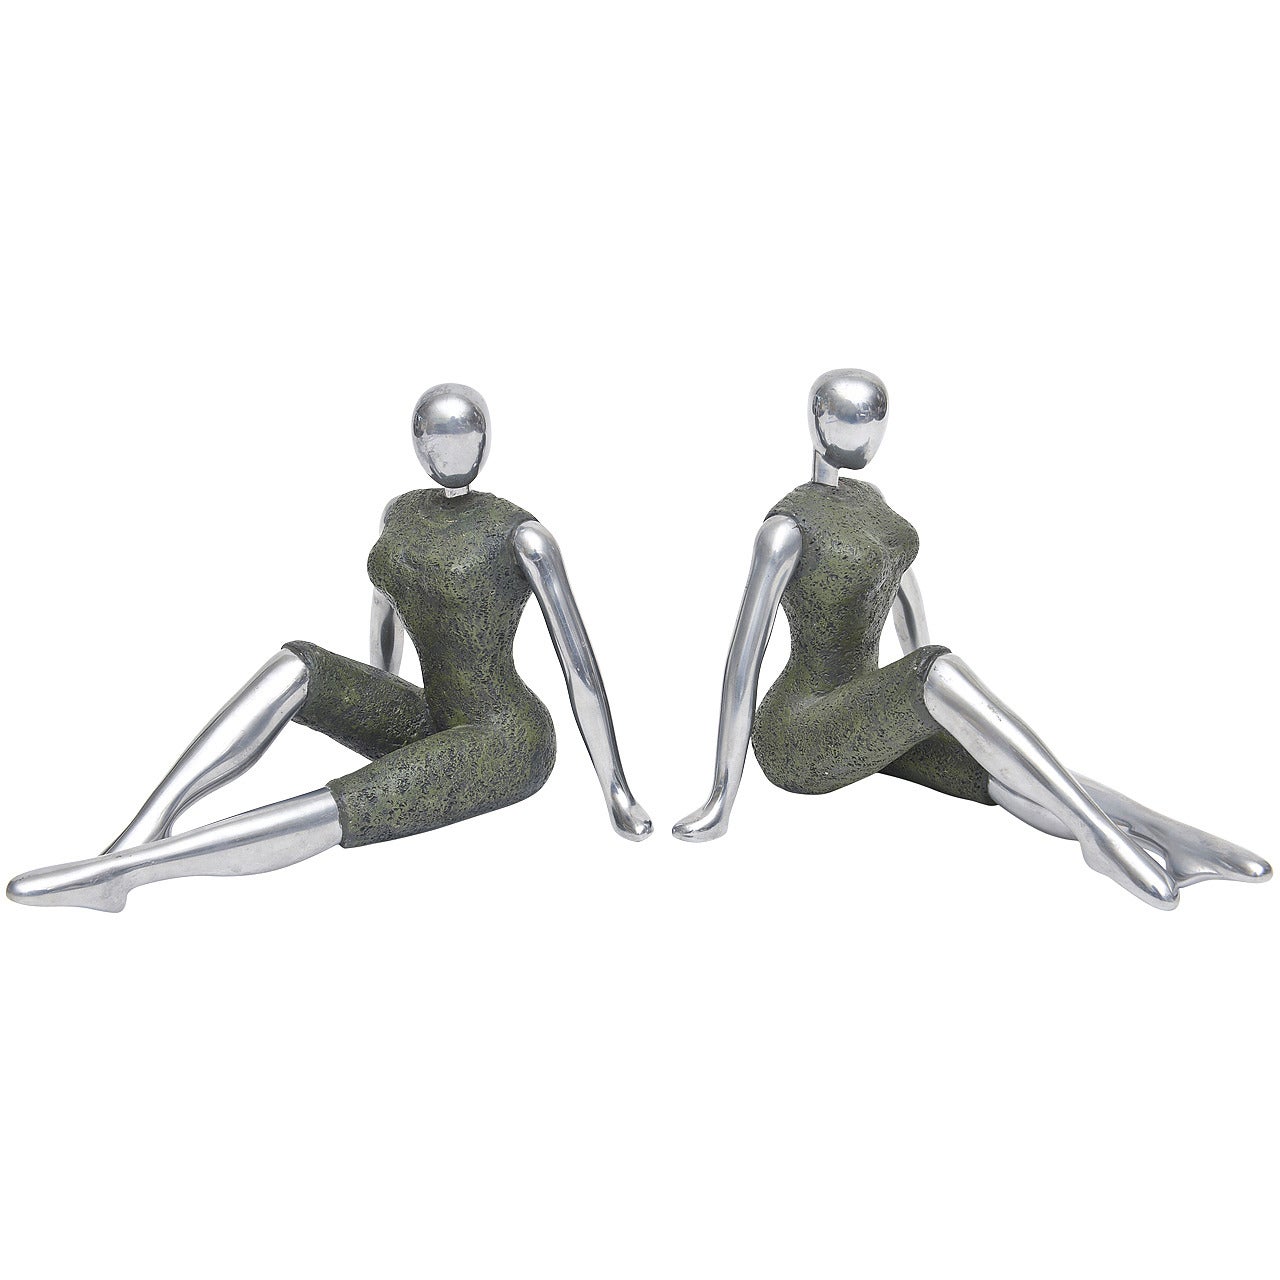 Pair of Stylized Modernist Mannequin Like Metal Bookends or Objects